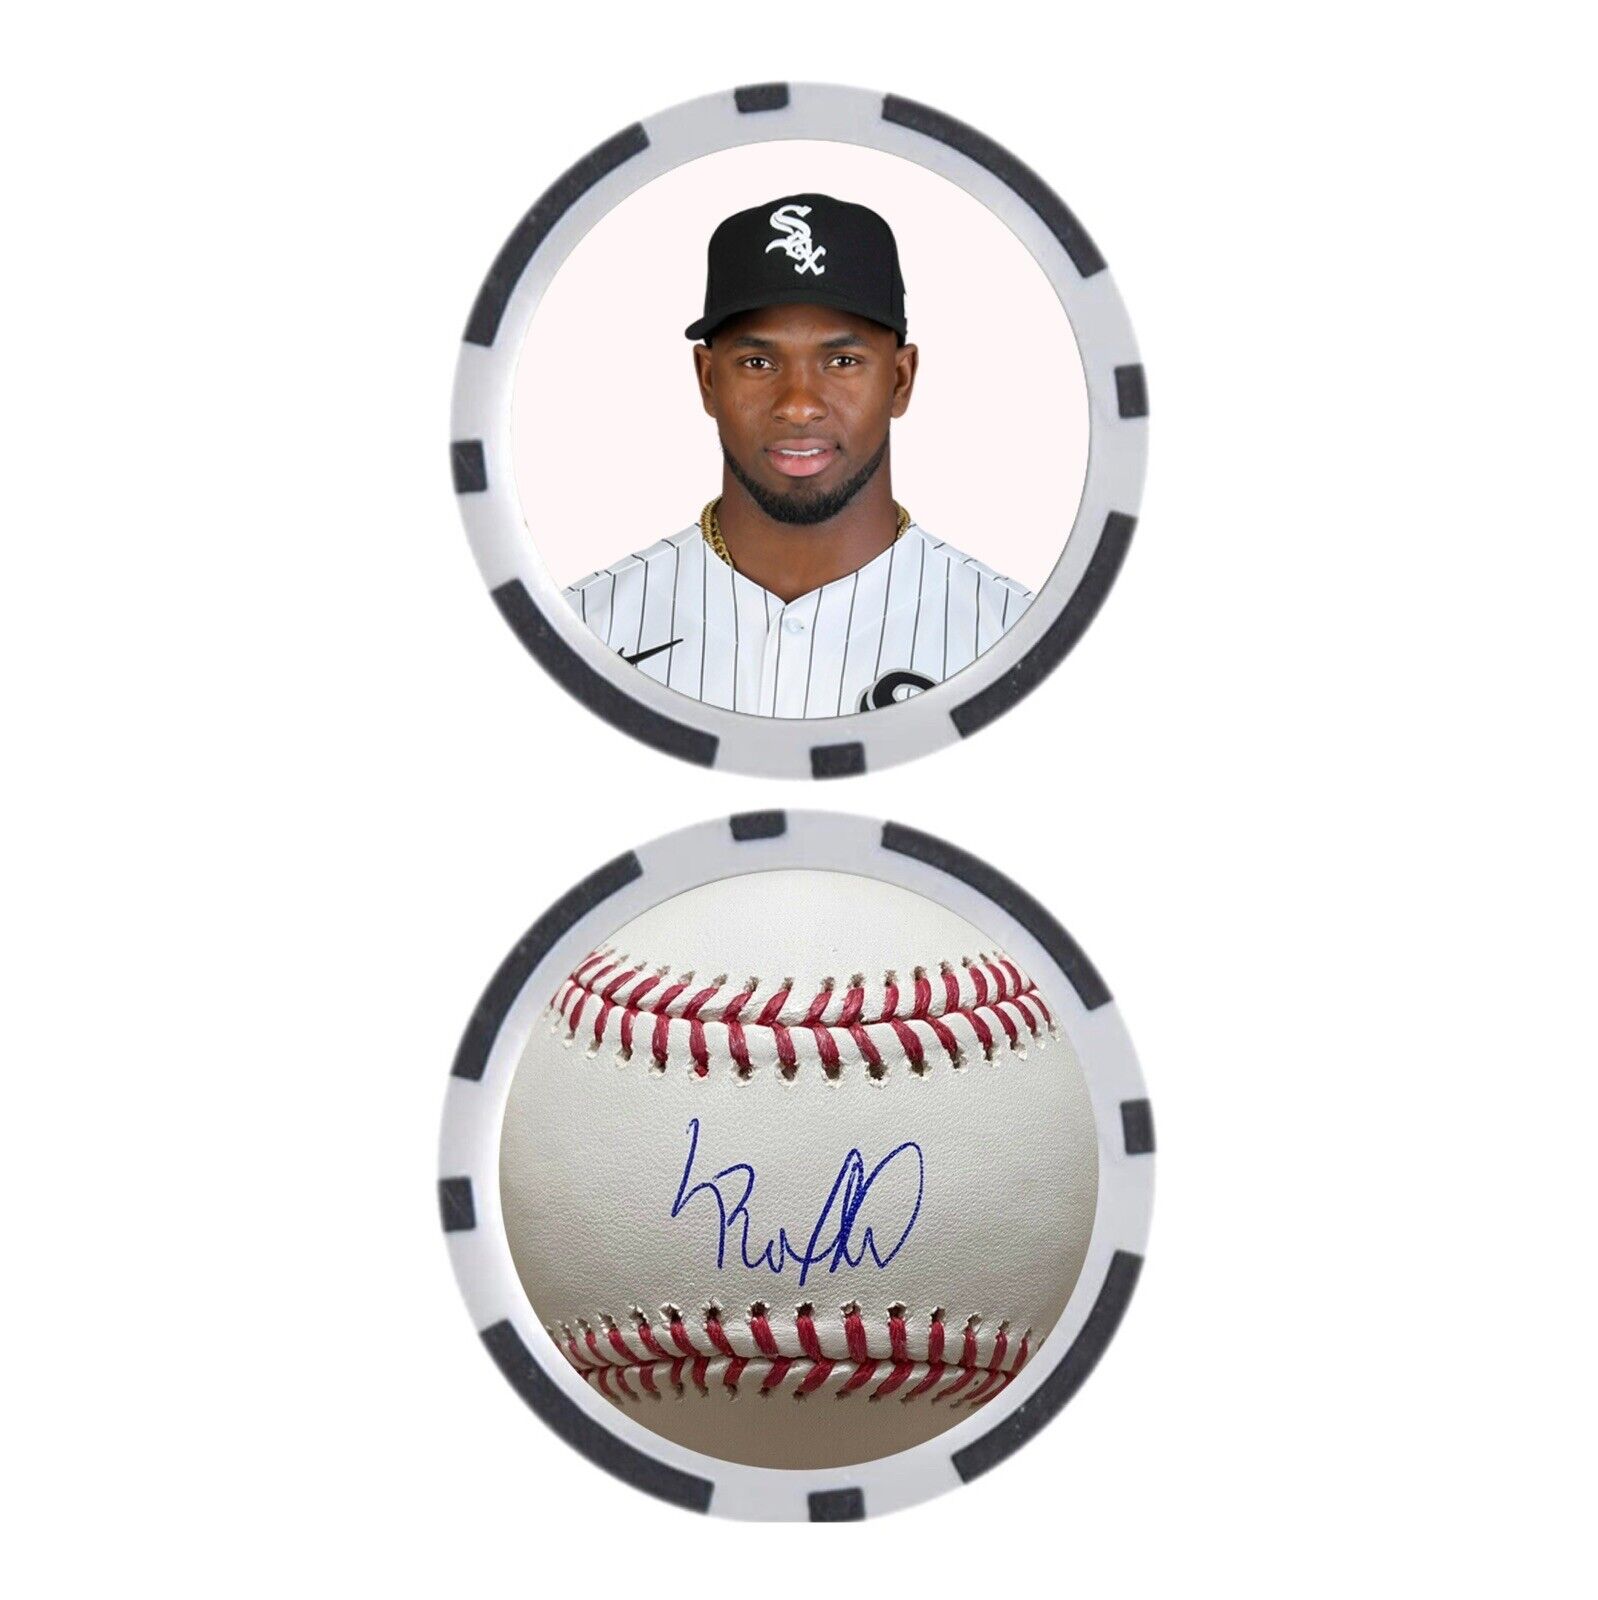 LUIS ROBERT - CHICAGO WHITE SOX - POKER CHIP ***SIGNED***